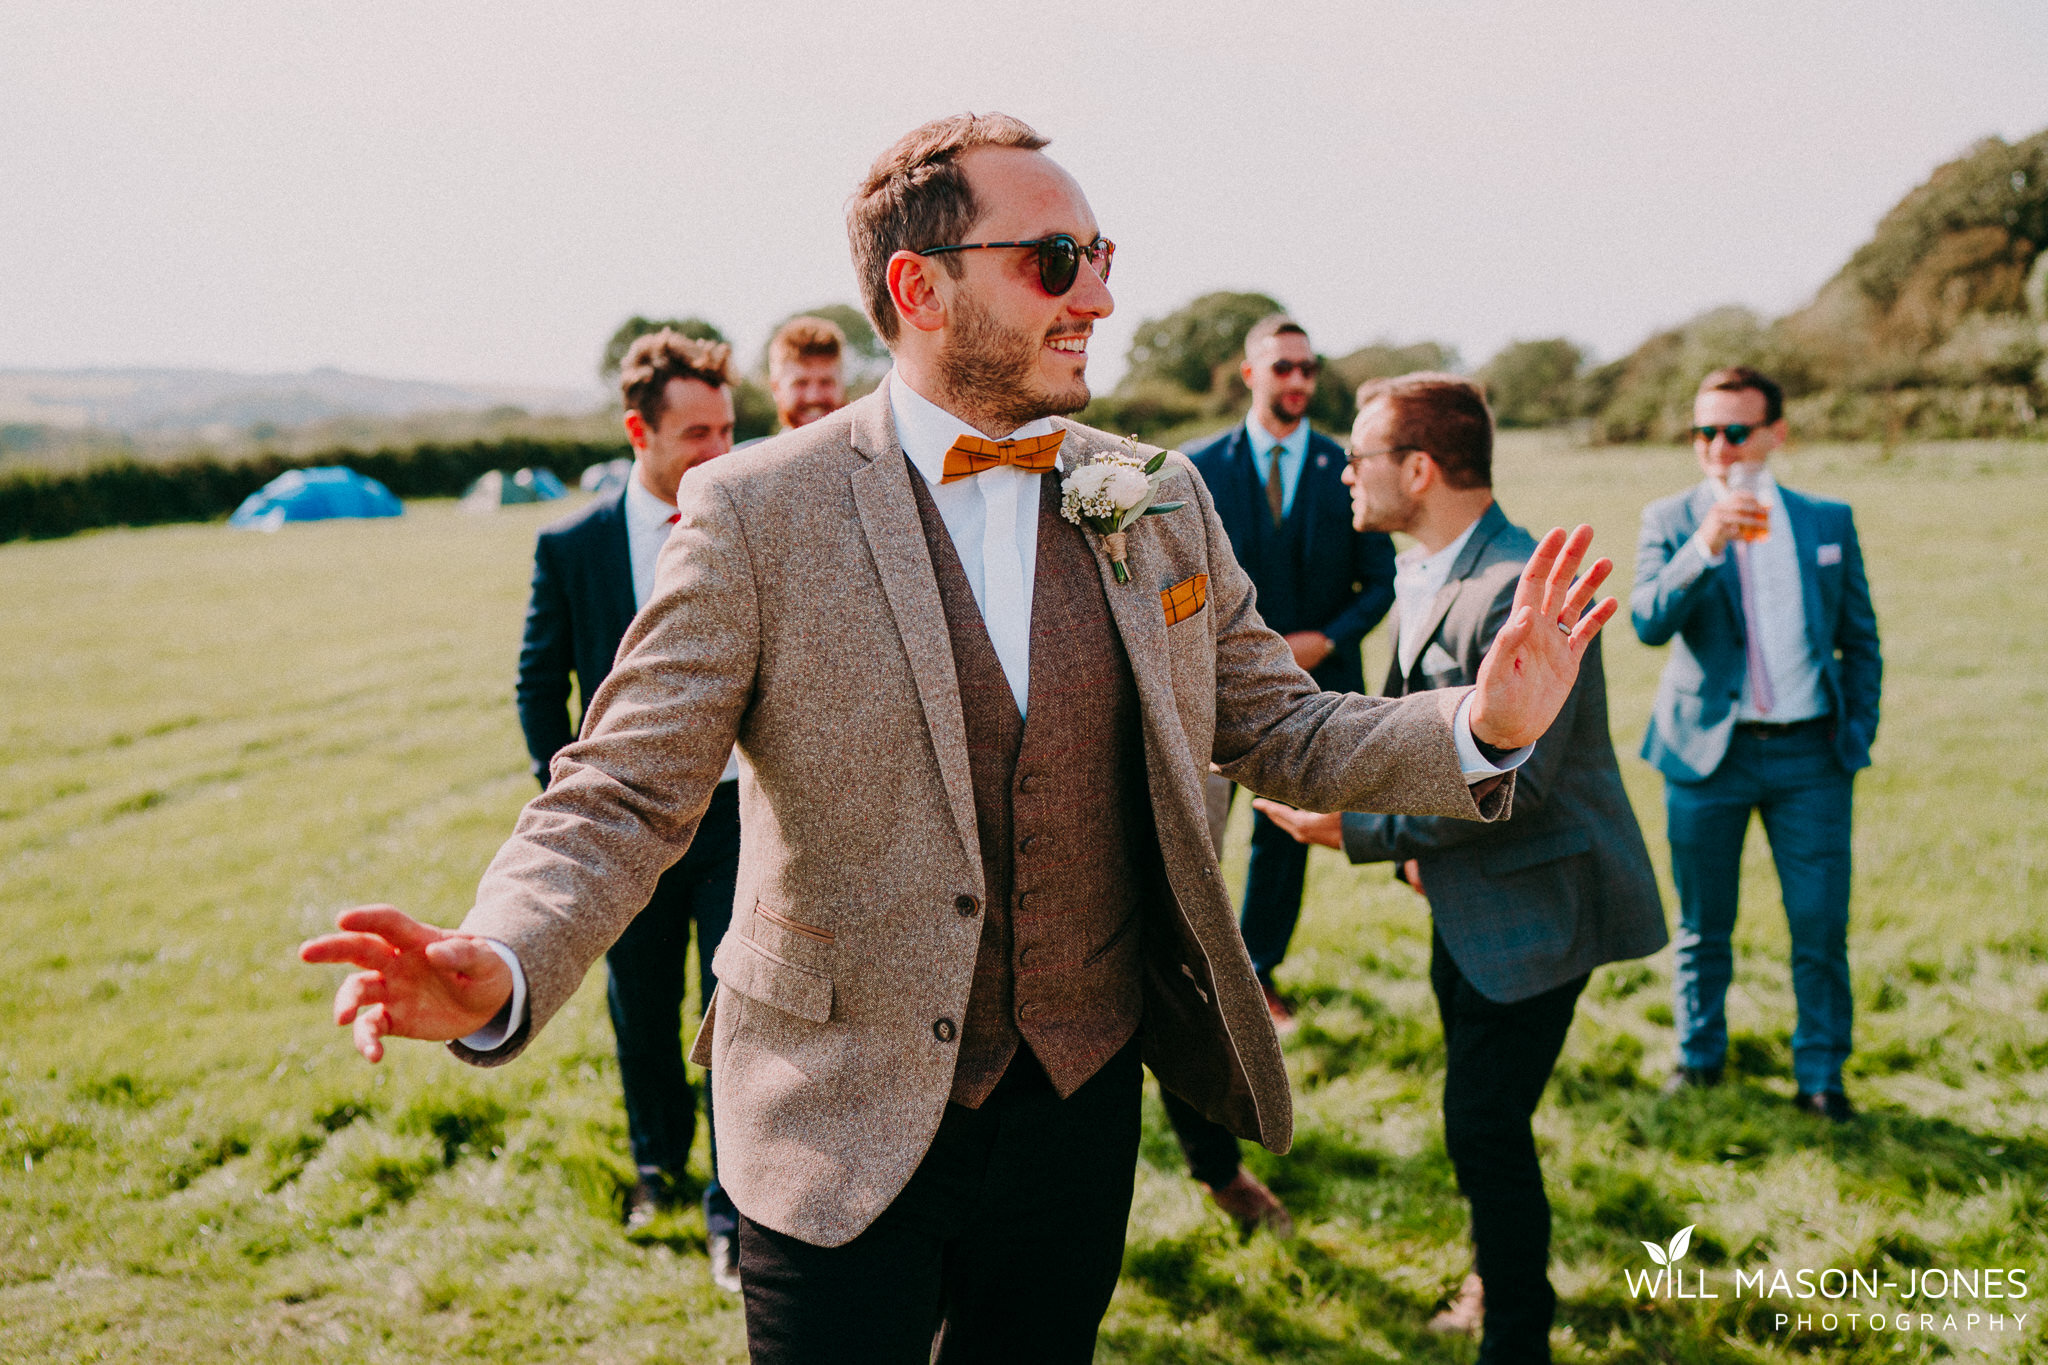  perriswood swansea festival confetti groups sunny wedding photography 